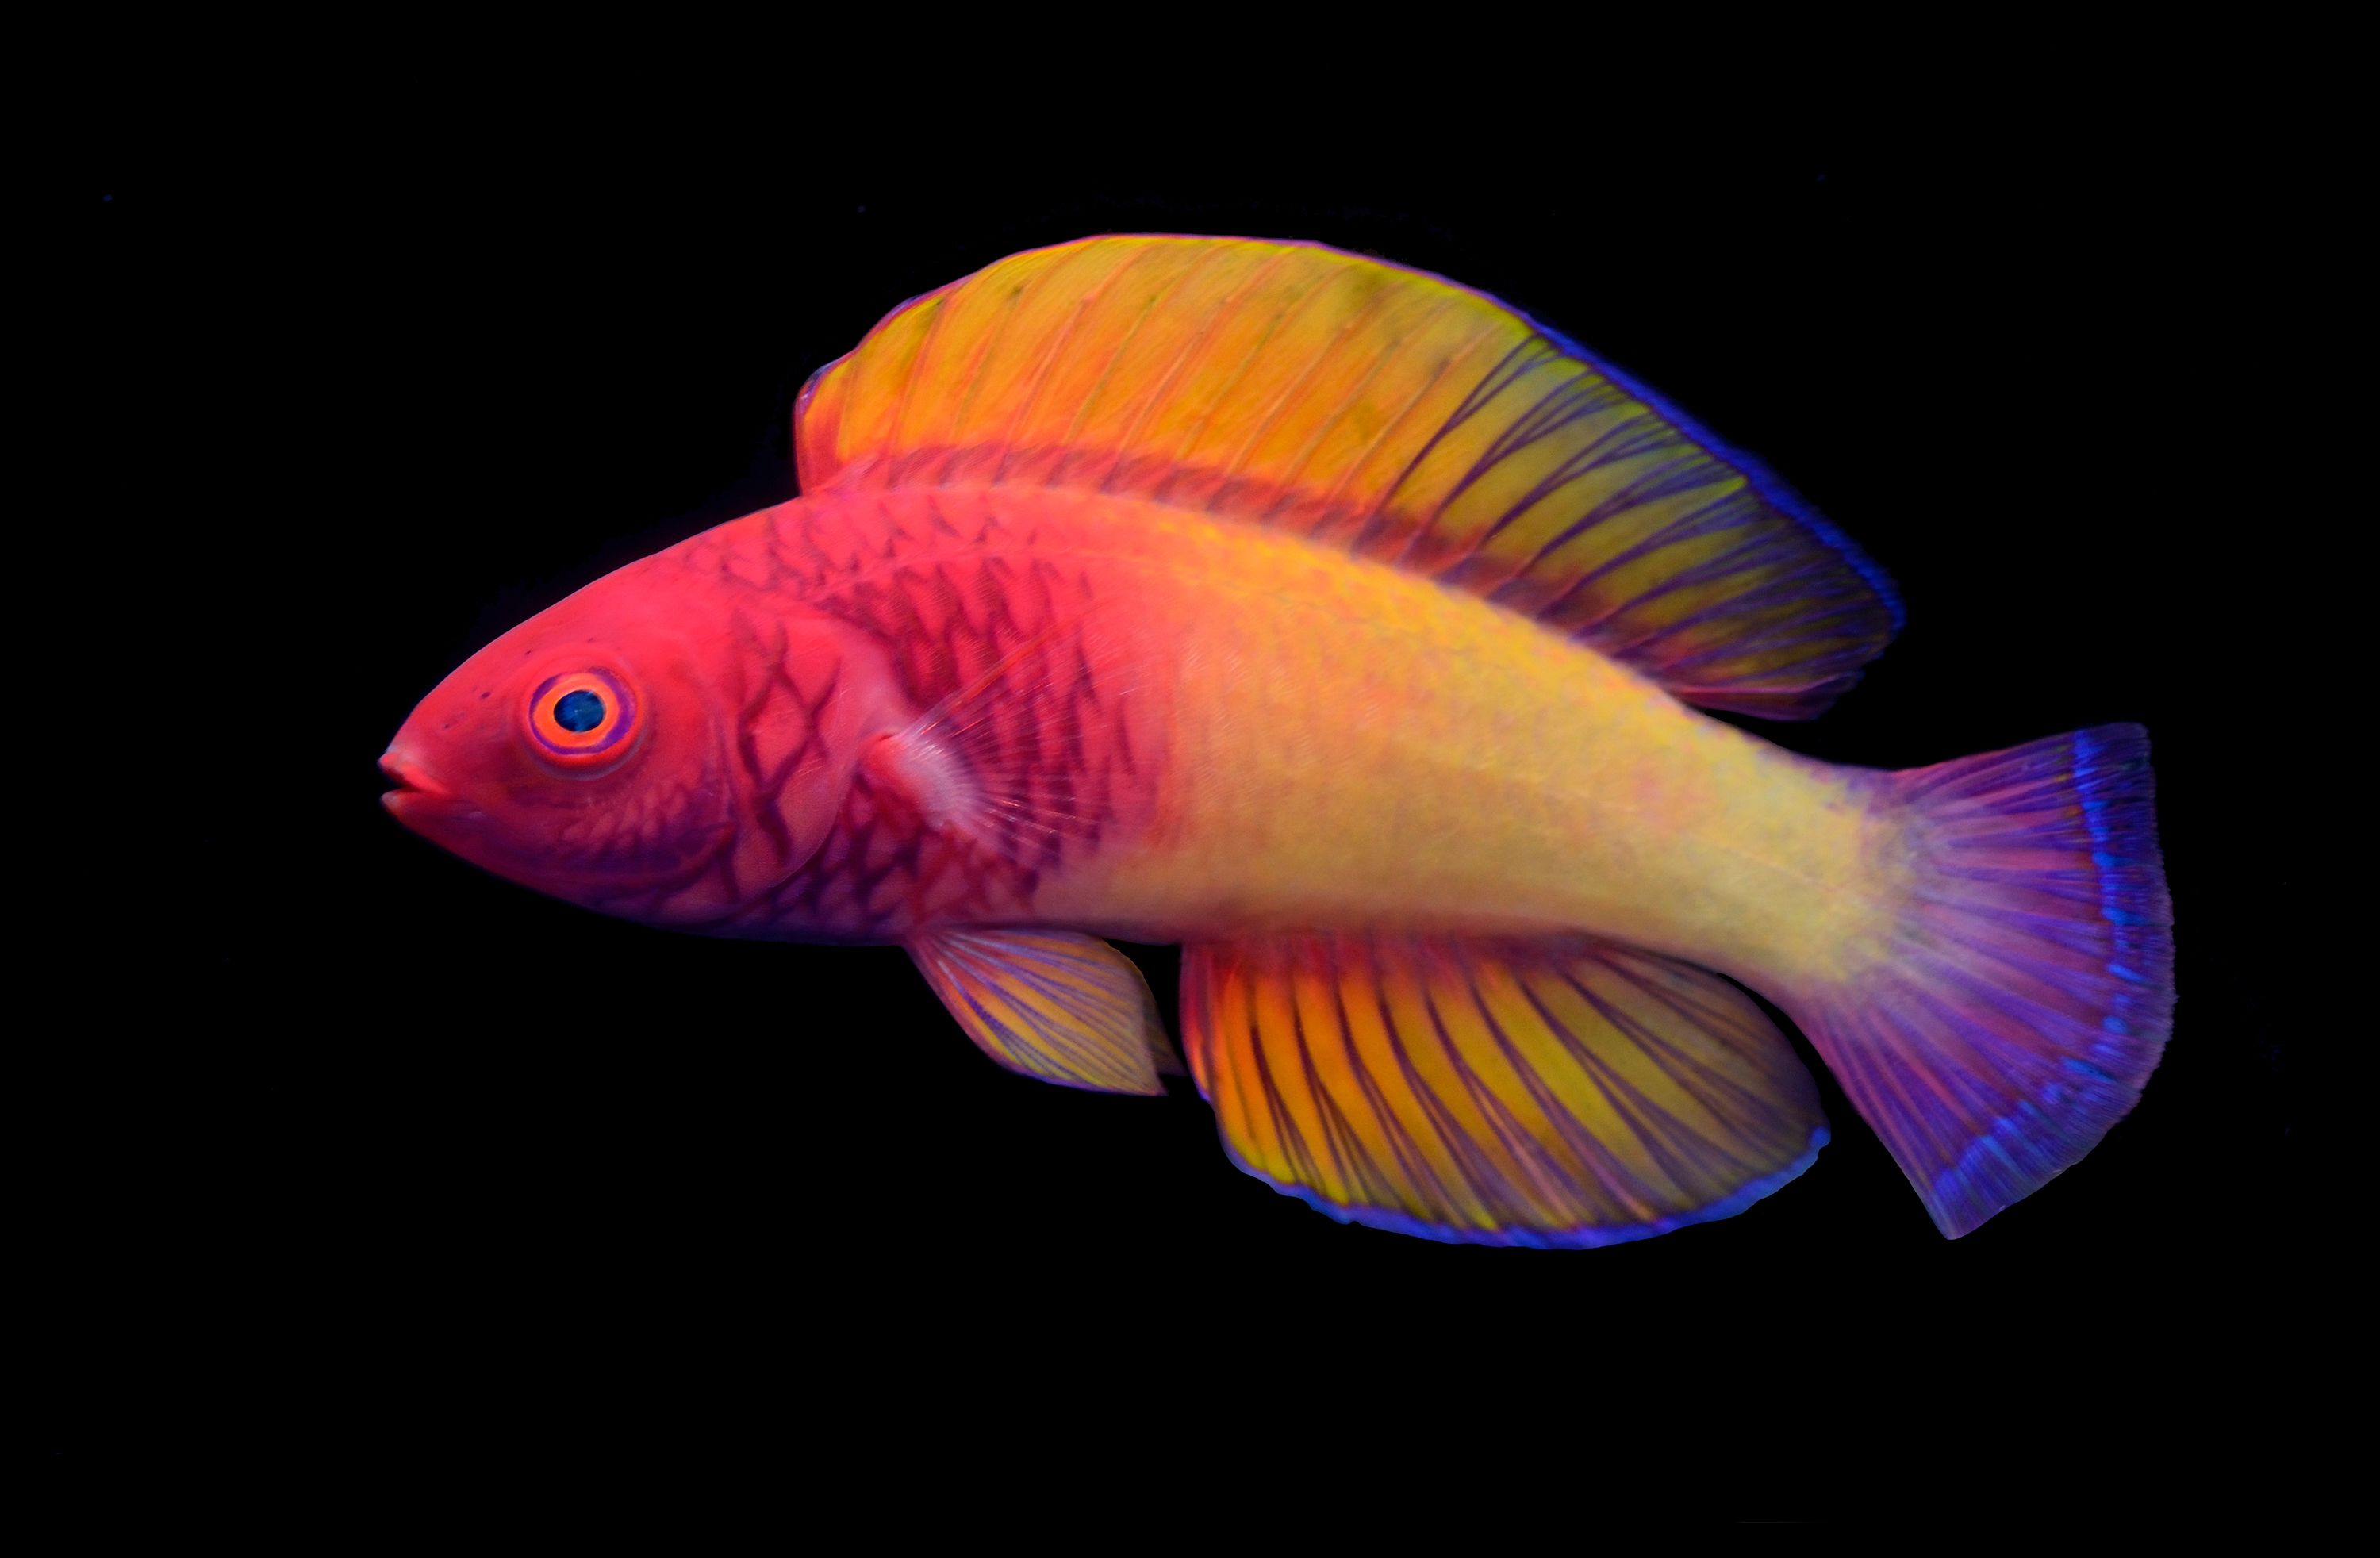 New rainbow-colored fish lives in the ocean's 'twilight zone' | CNN